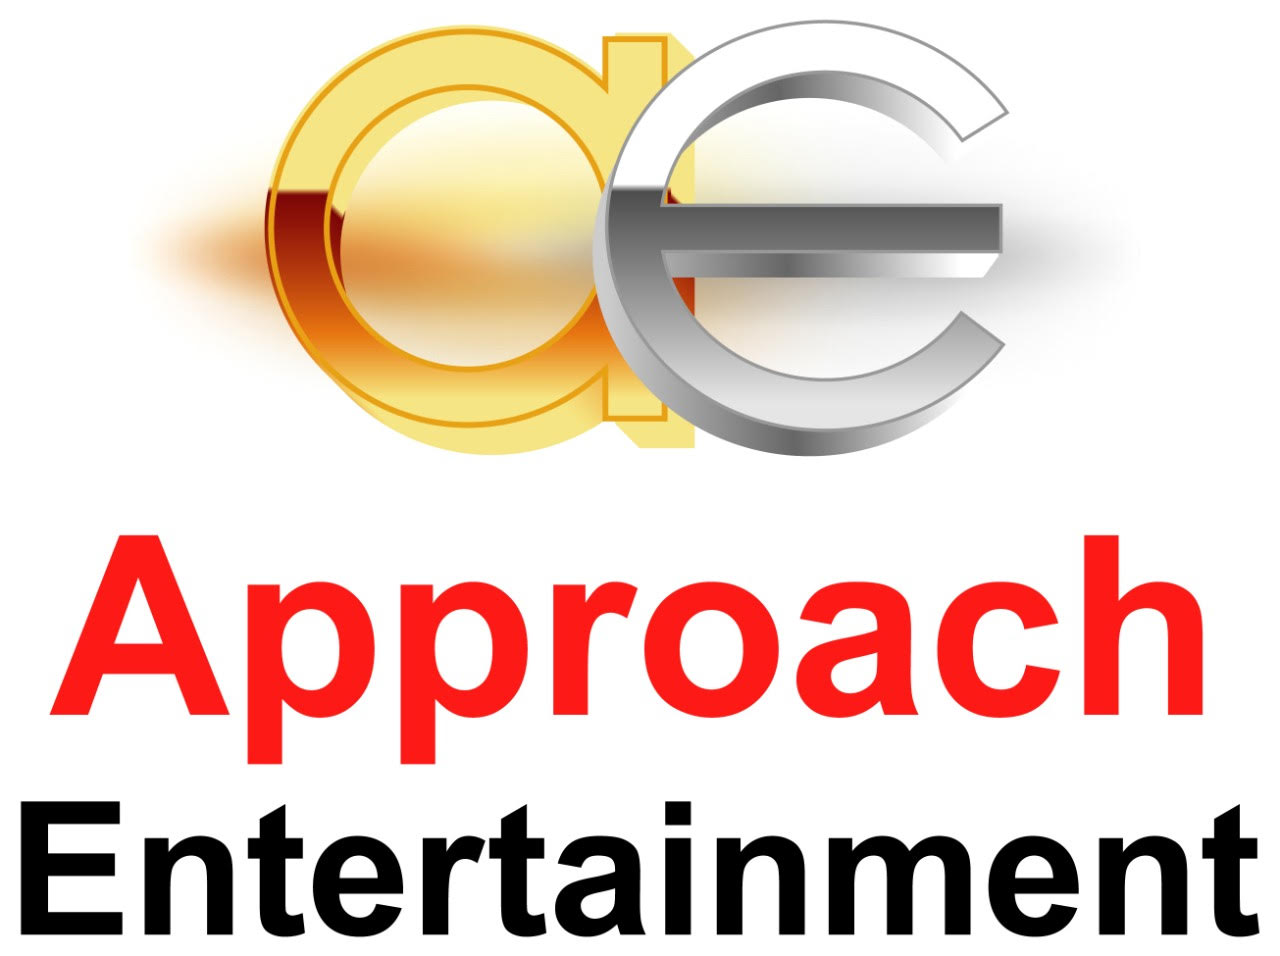 Approach Entertainment Named Exclusive PR & Celebrity Partner for India Content Leadership Awards